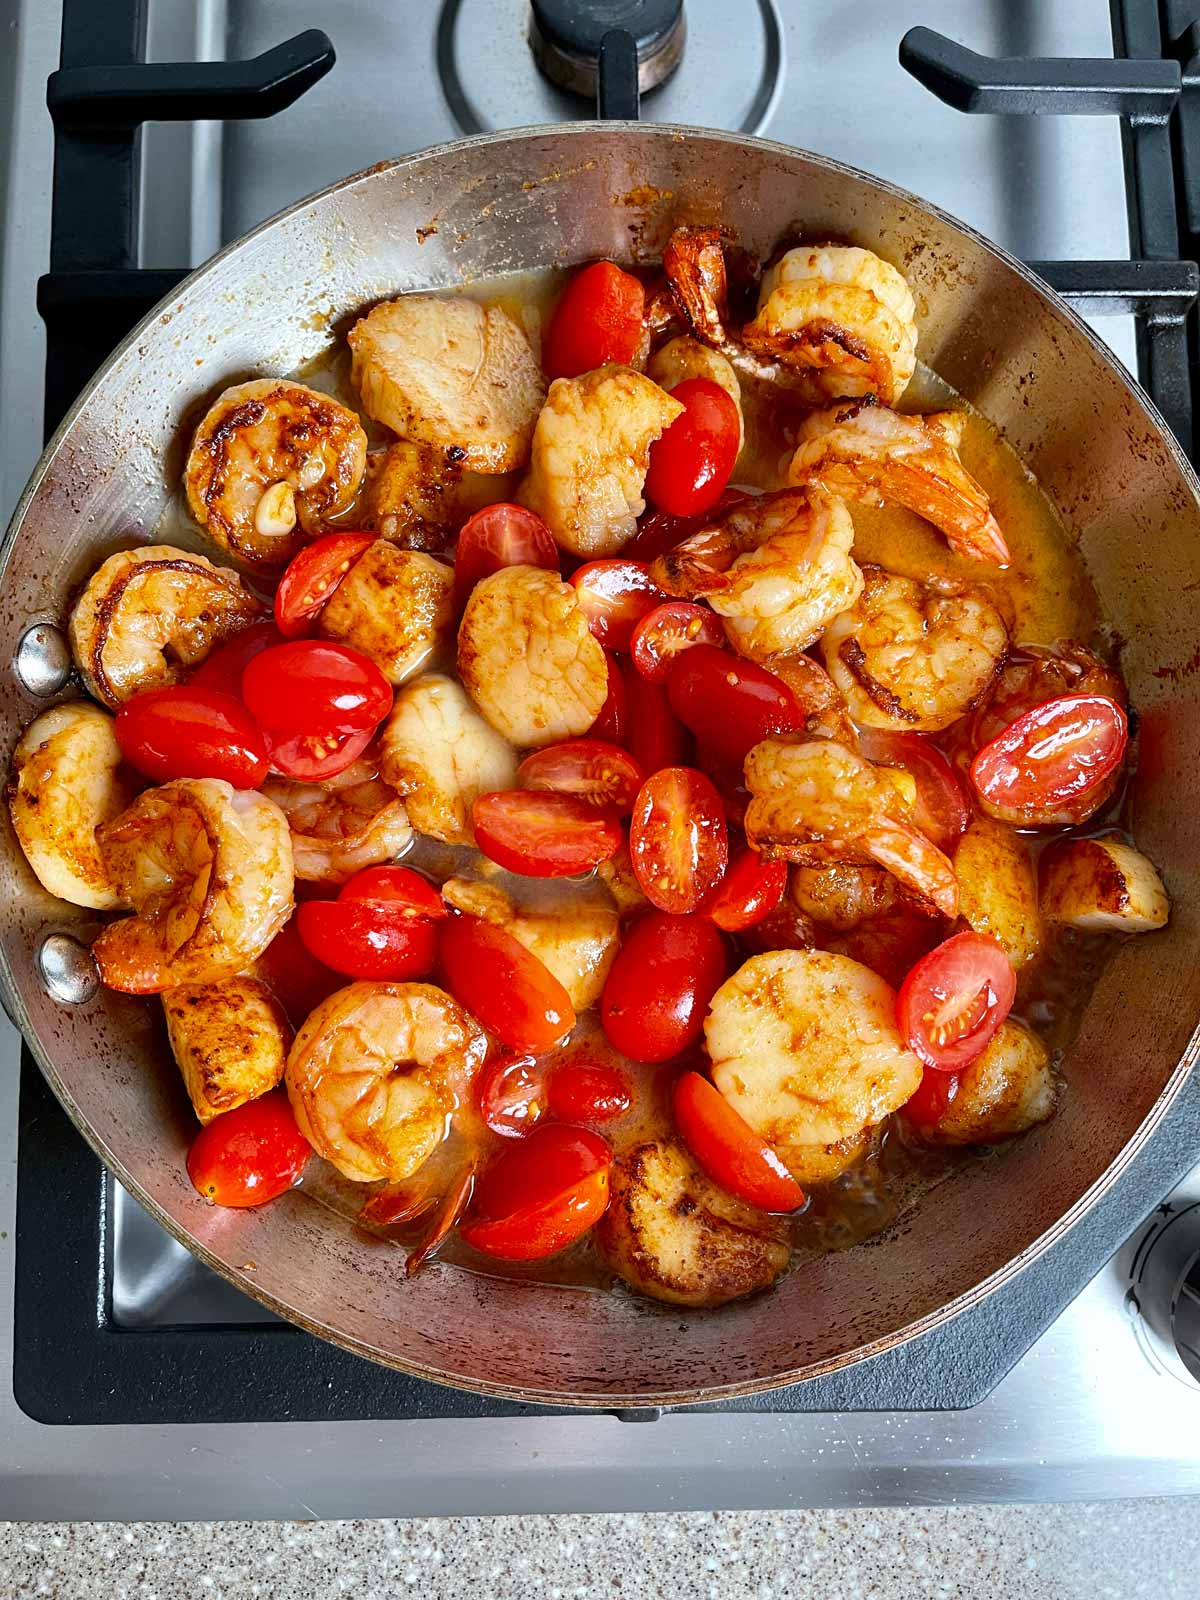 Shrimp, scallops, and tomatoes cooking in broth